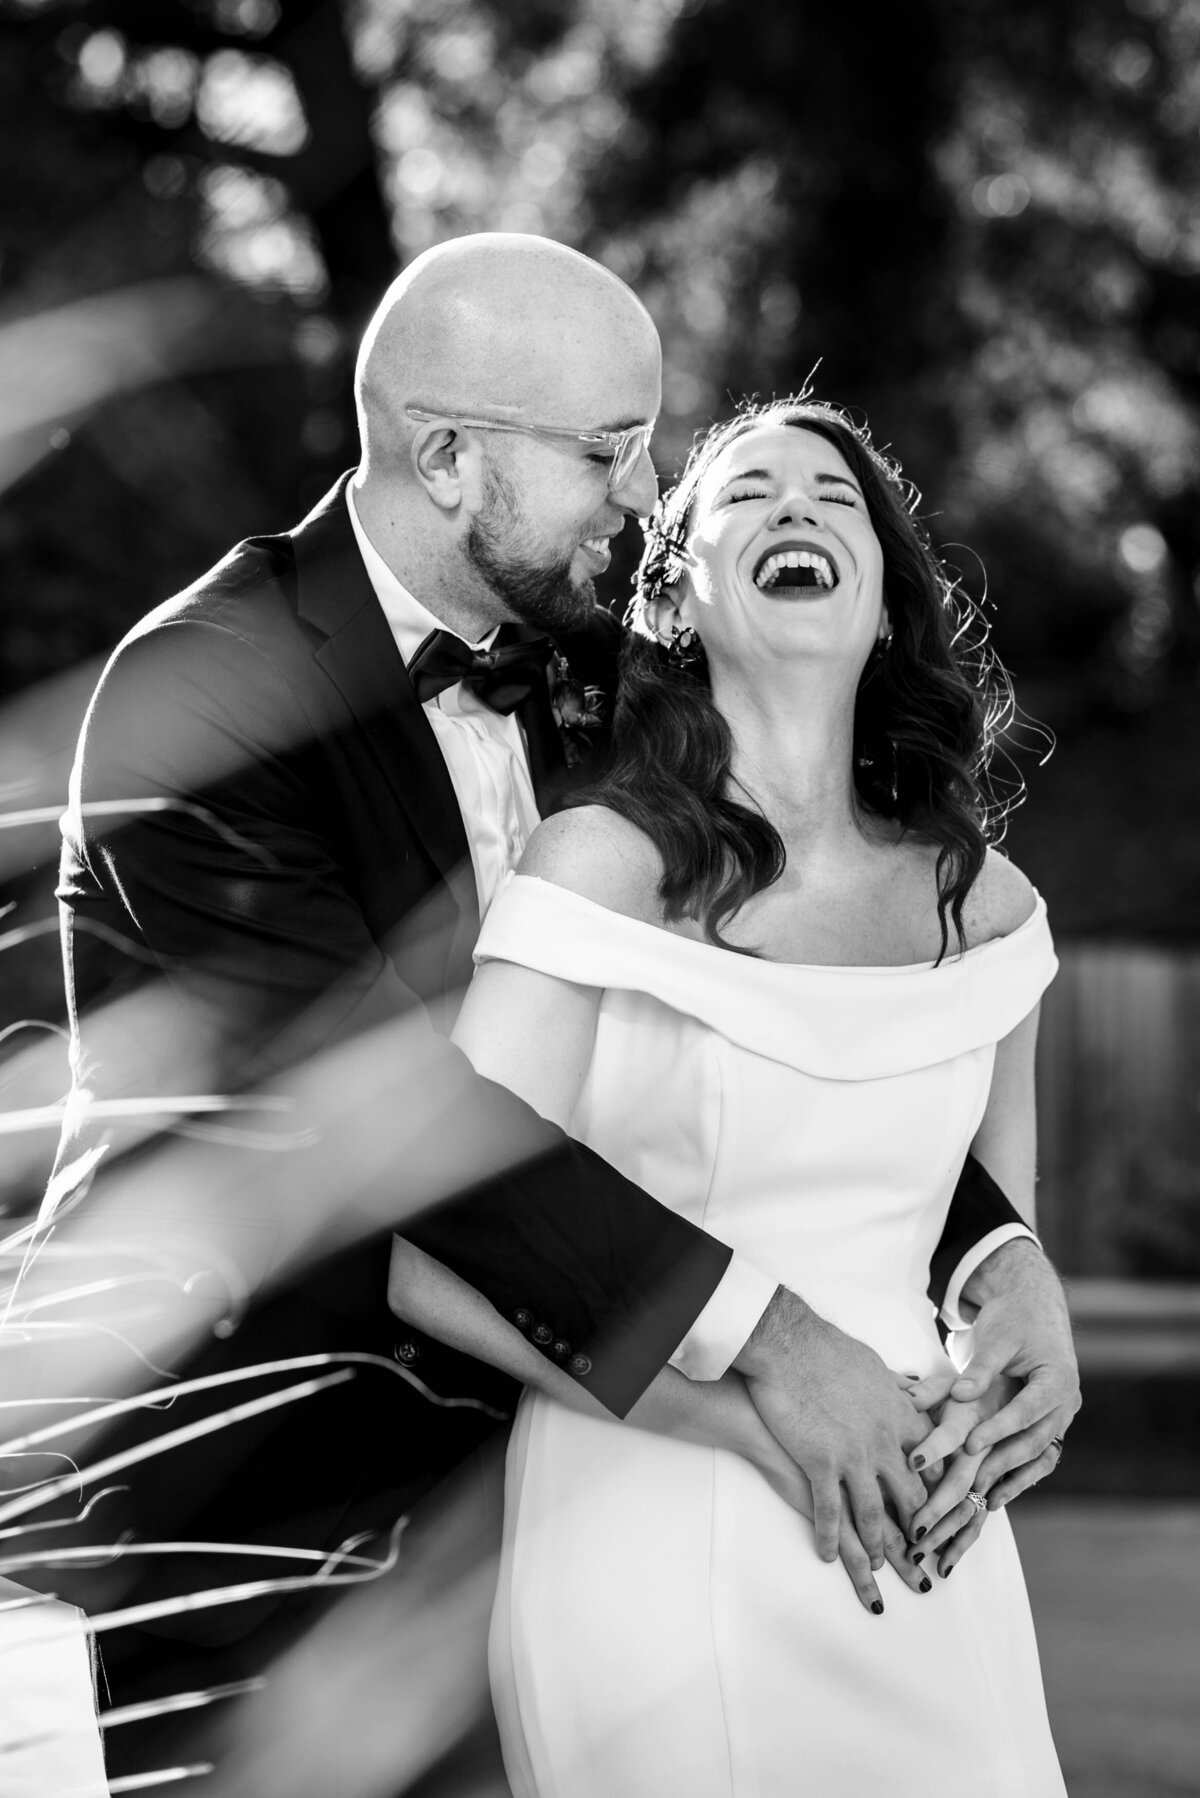 Black-and-white-photograph-of-grooms-arms-around-his-bride-smiling-at-her-as-she-leans-her-head-back-laughing-outside-Eventide-Brewing-in-Atlanta